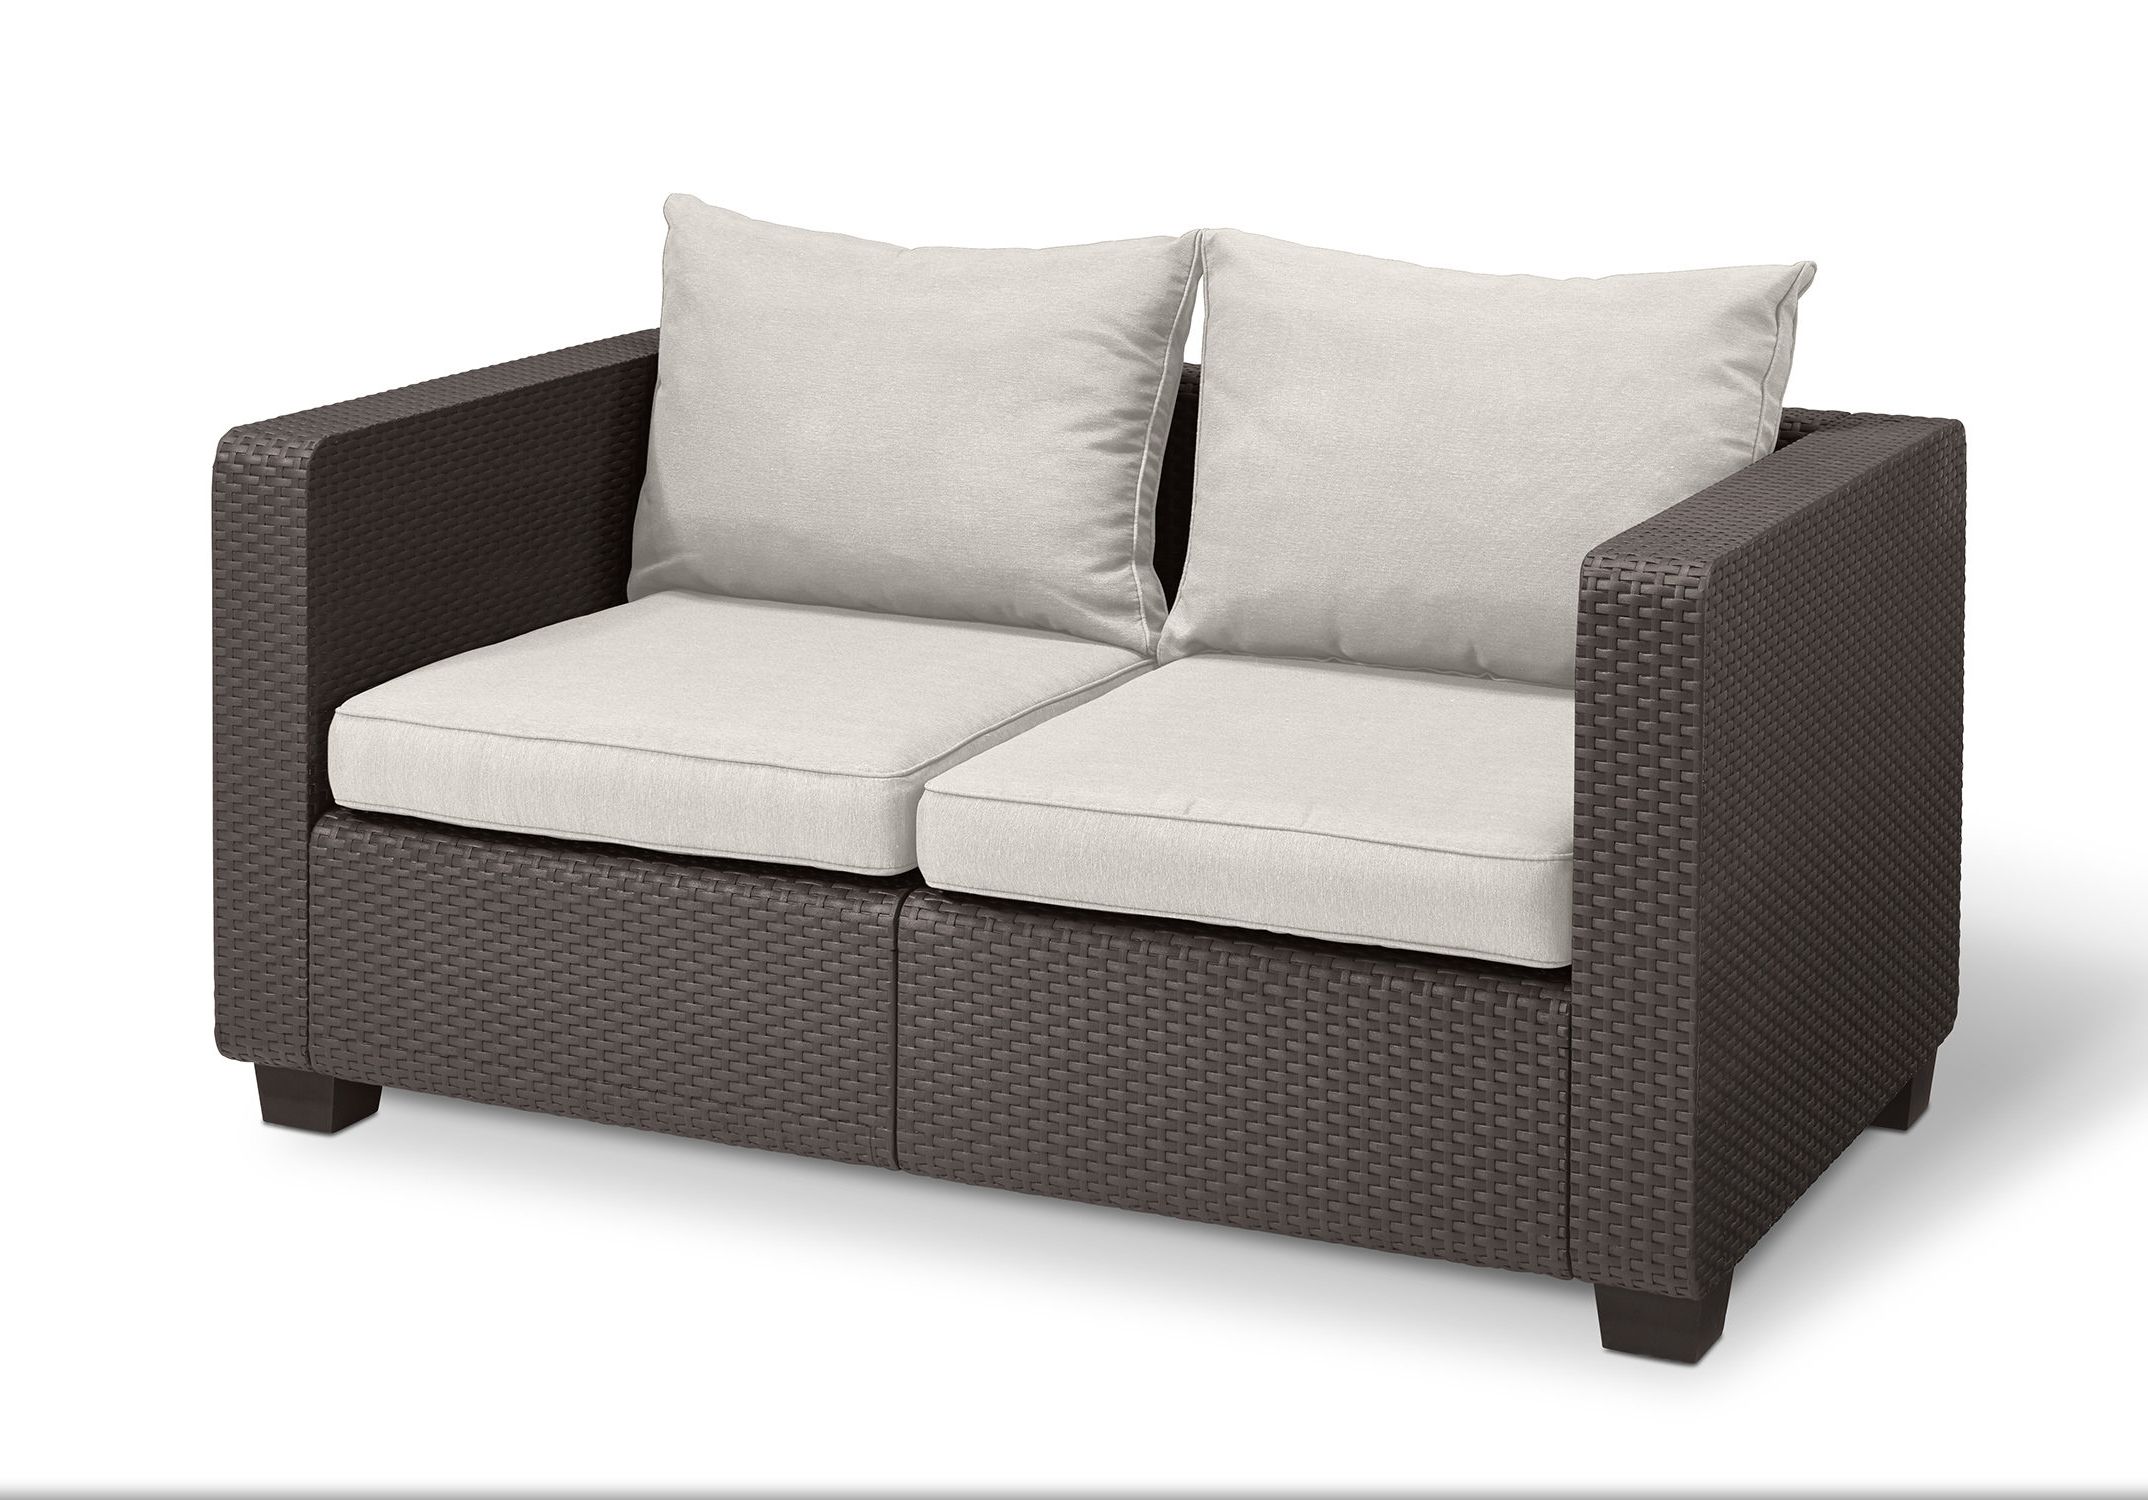 Halloran Loveseat With Sunbrella Cushions Inside Most Up To Date Belton Loveseats With Cushions (Photo 10 of 25)